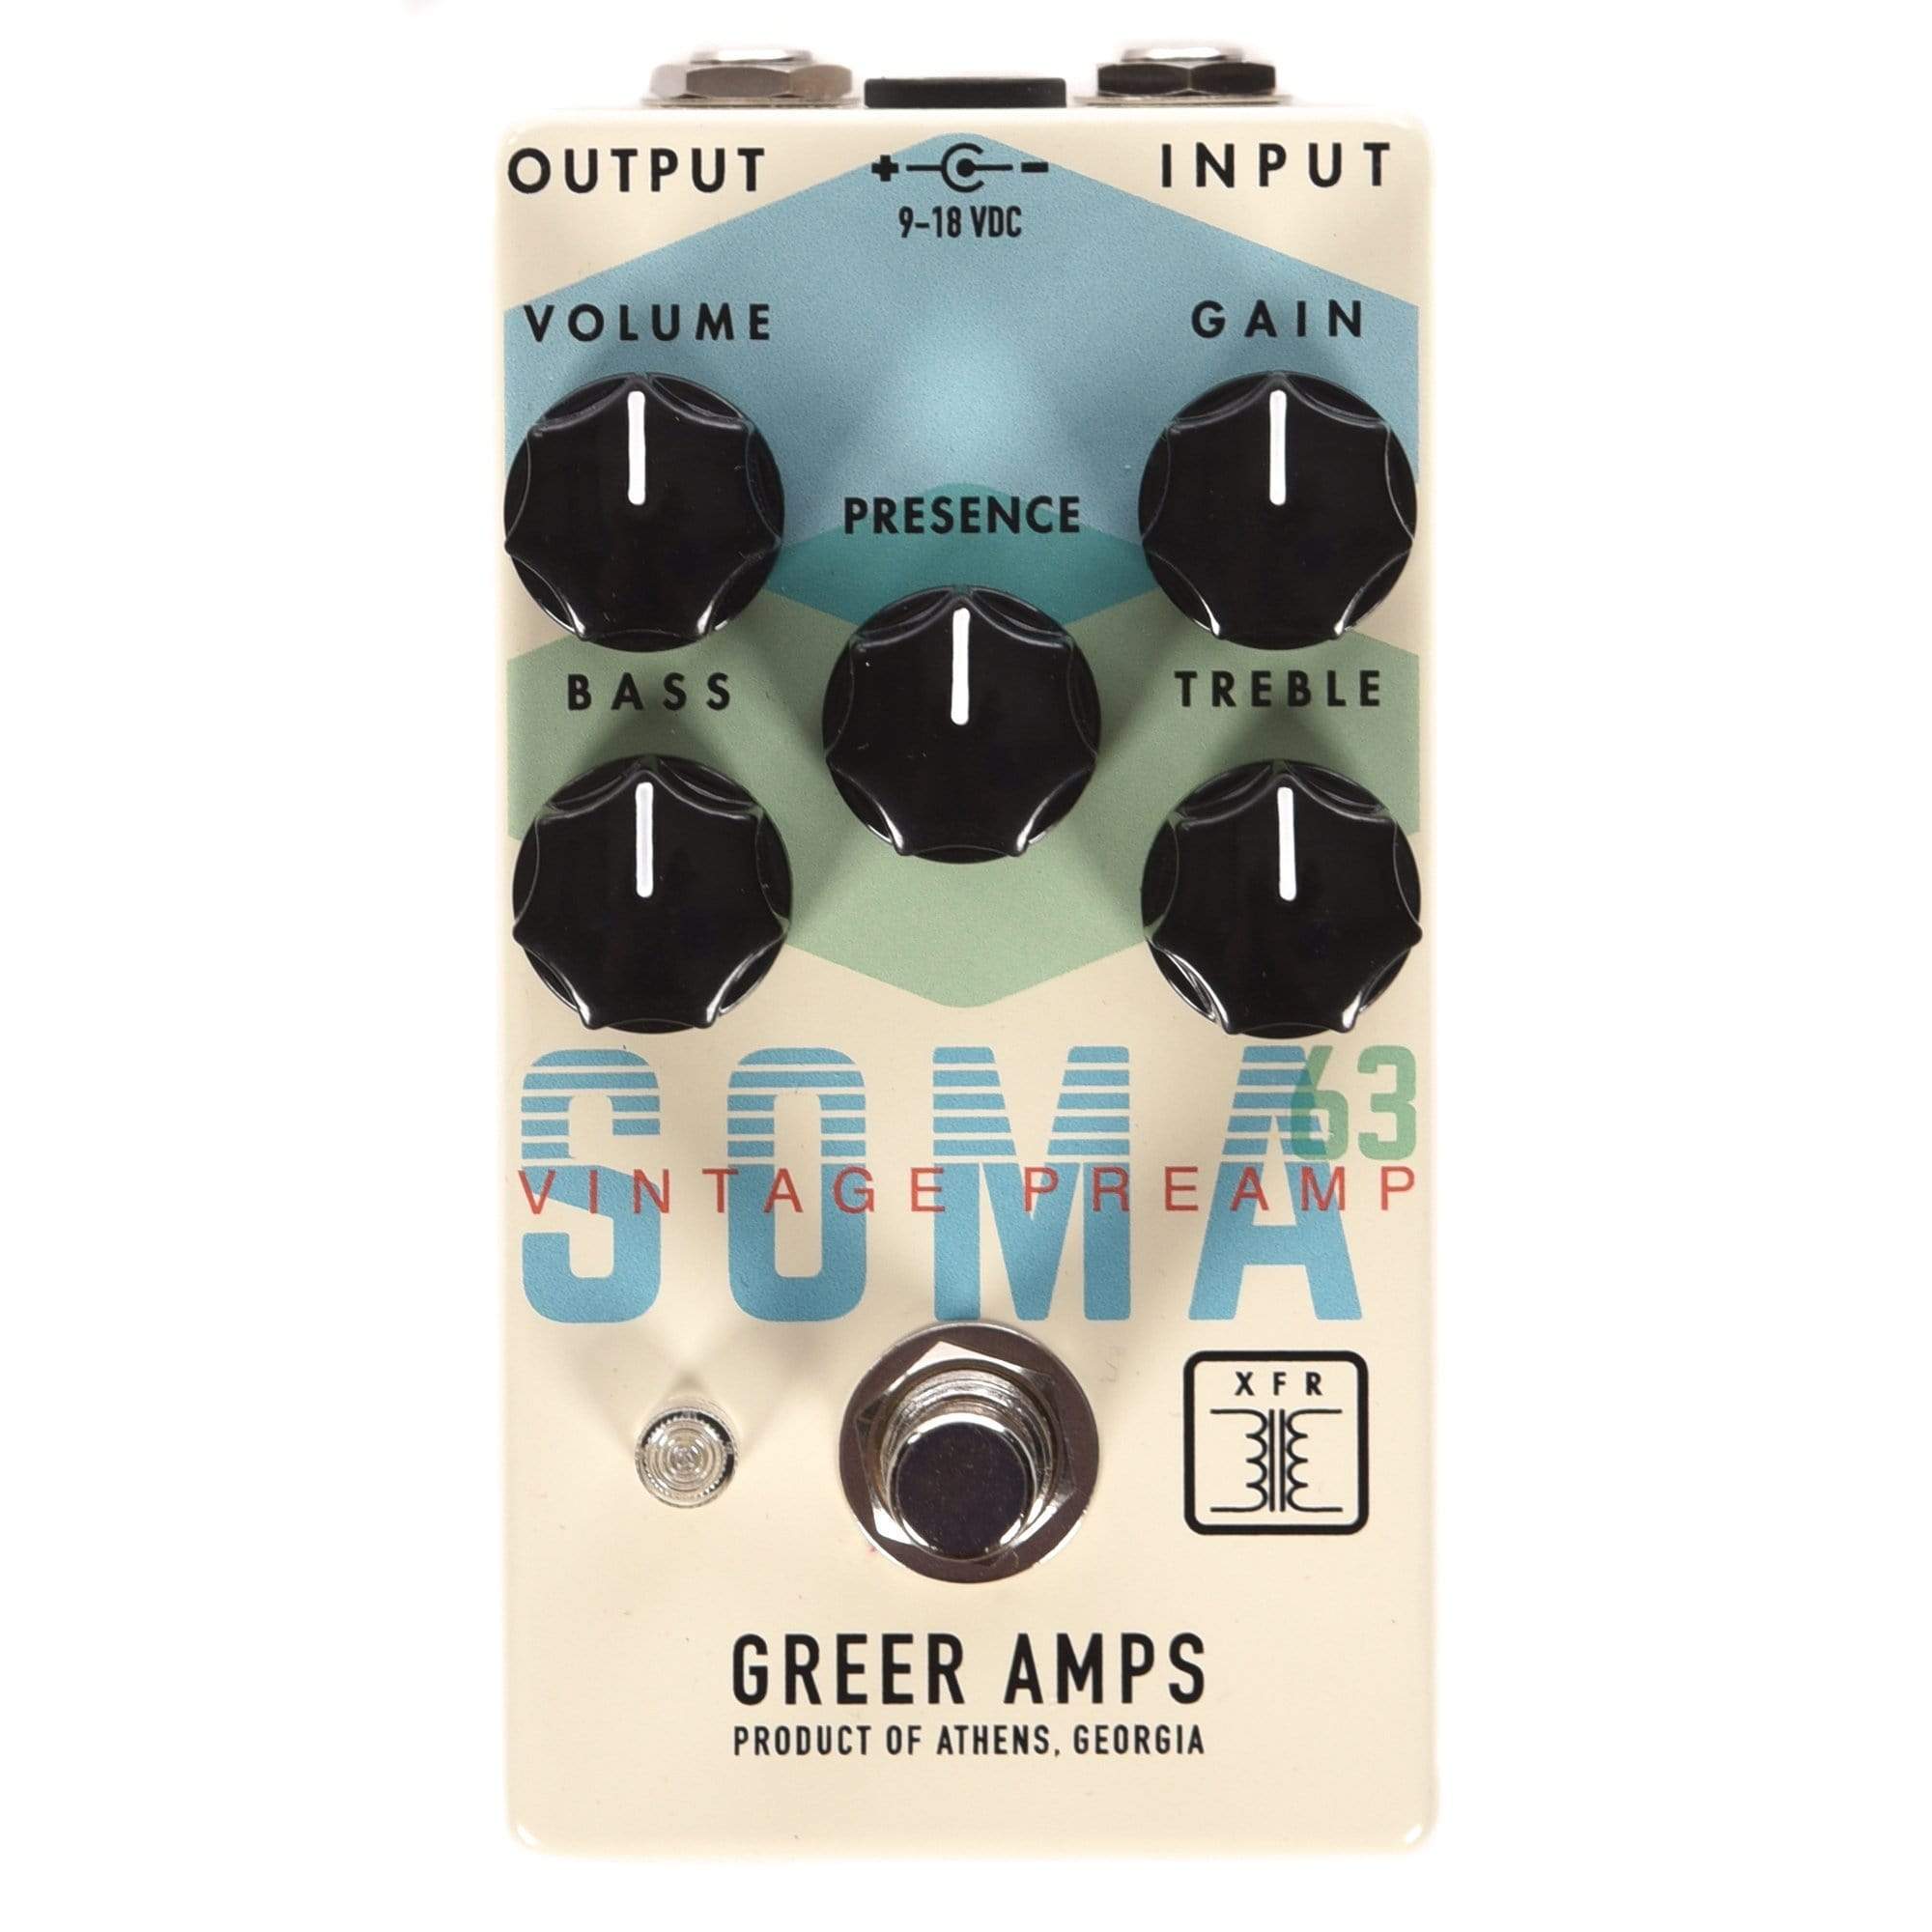 Greer Amps SOMA 63 Vintage Preamp Effects and Pedals / Overdrive and Boost